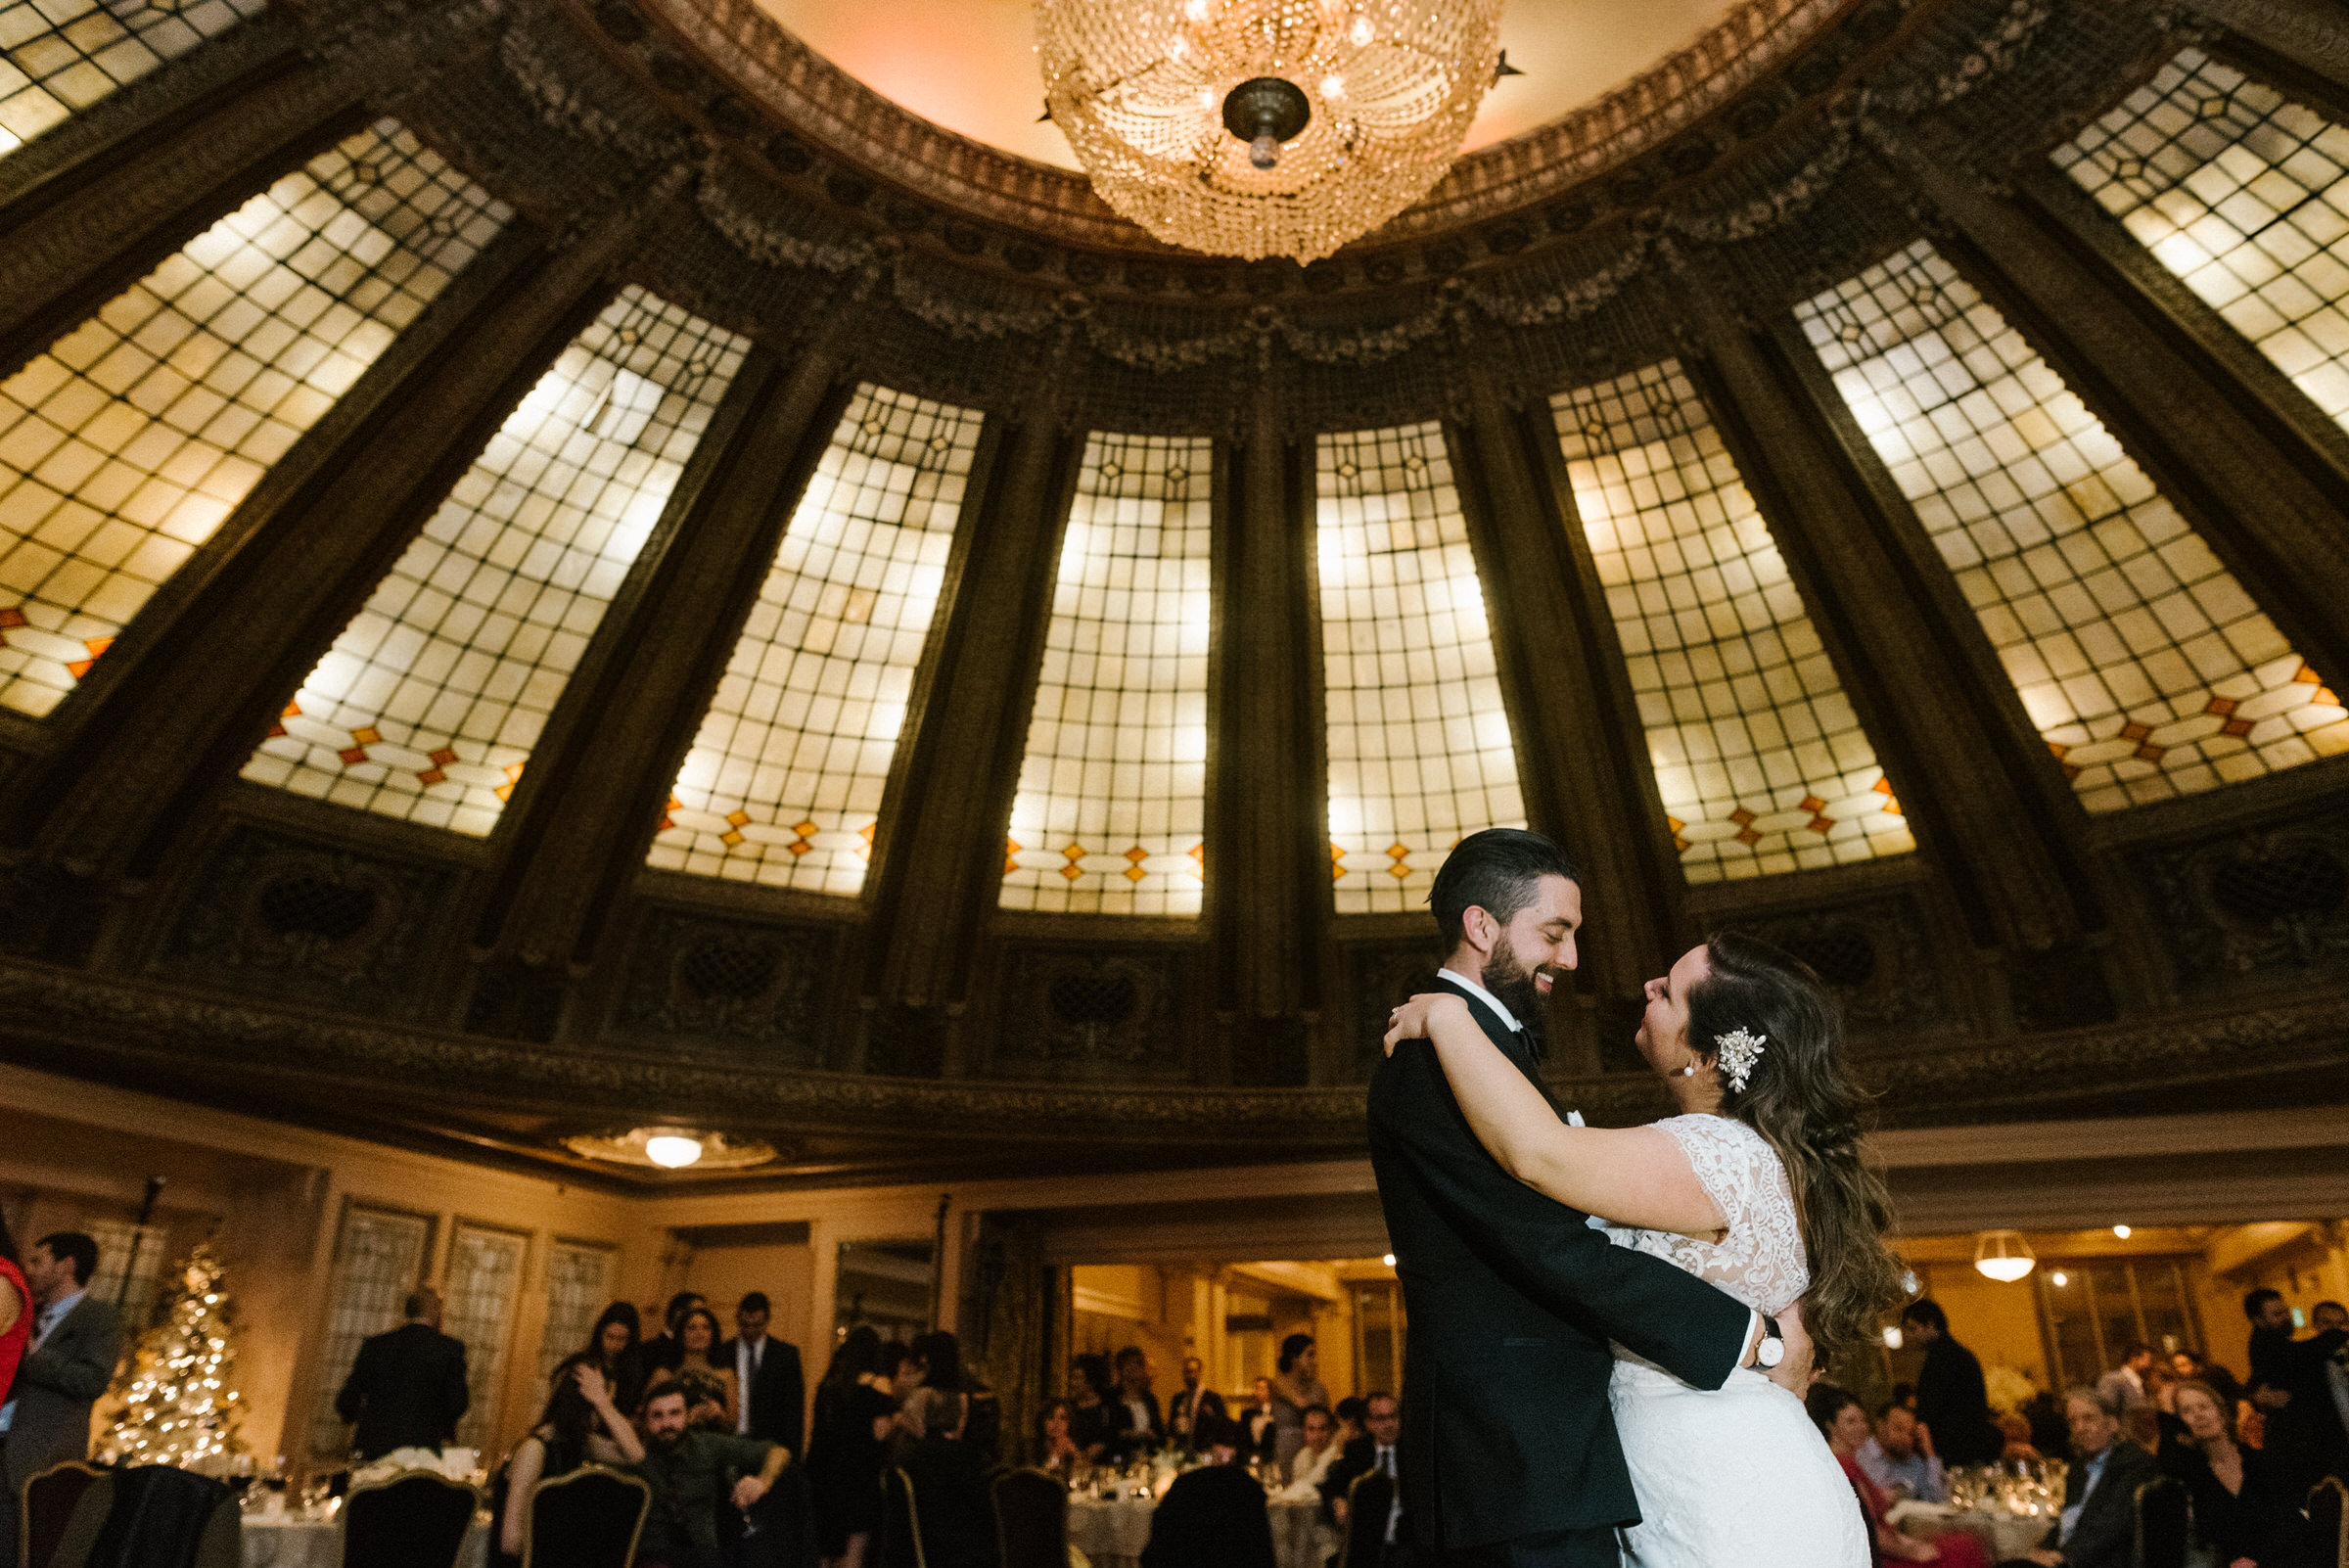 Nina and Nick's first dance for their wedding reception under the dome at The Arctic Club, Seattle.